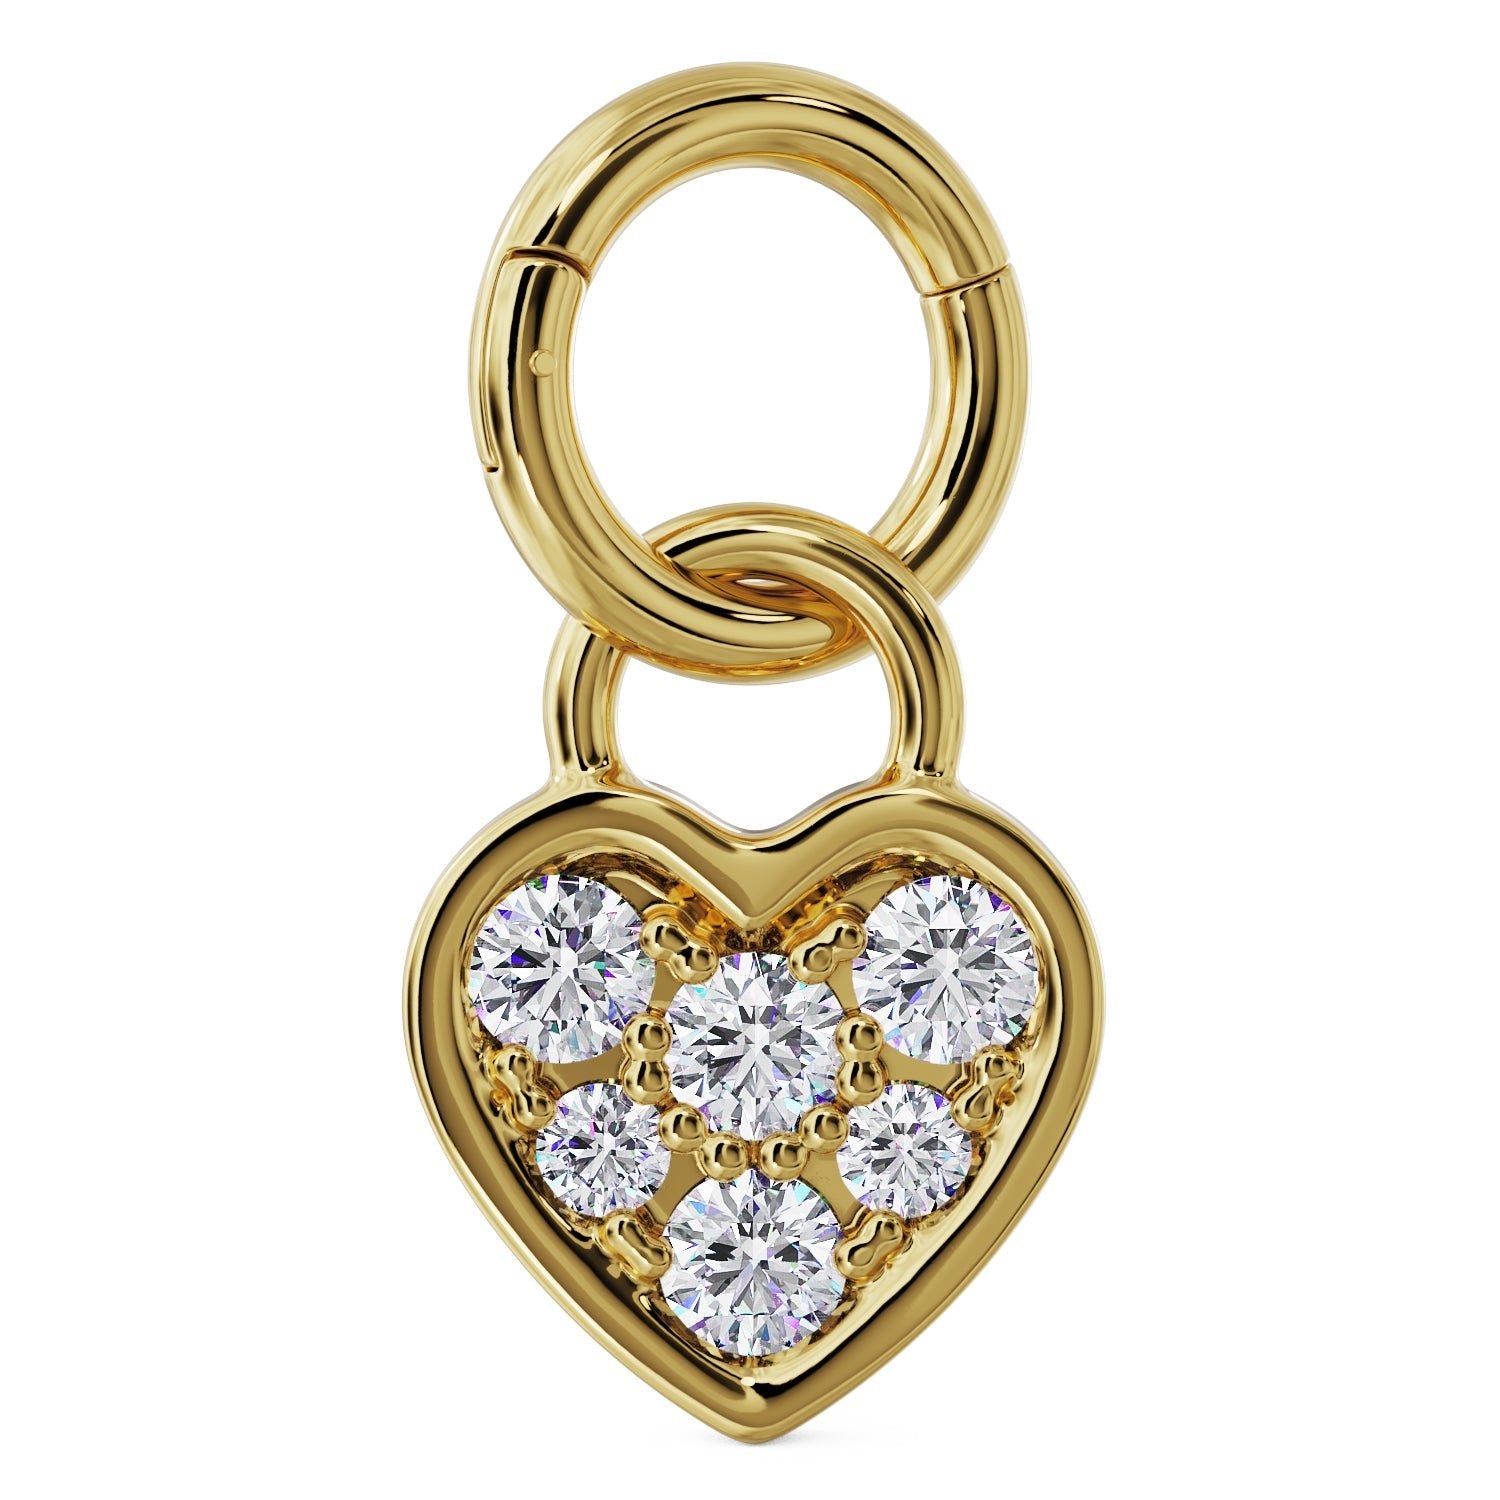 Clicker Ring & Gold Heart Diamond Pave Charm Accessory for Piercing Jewelry